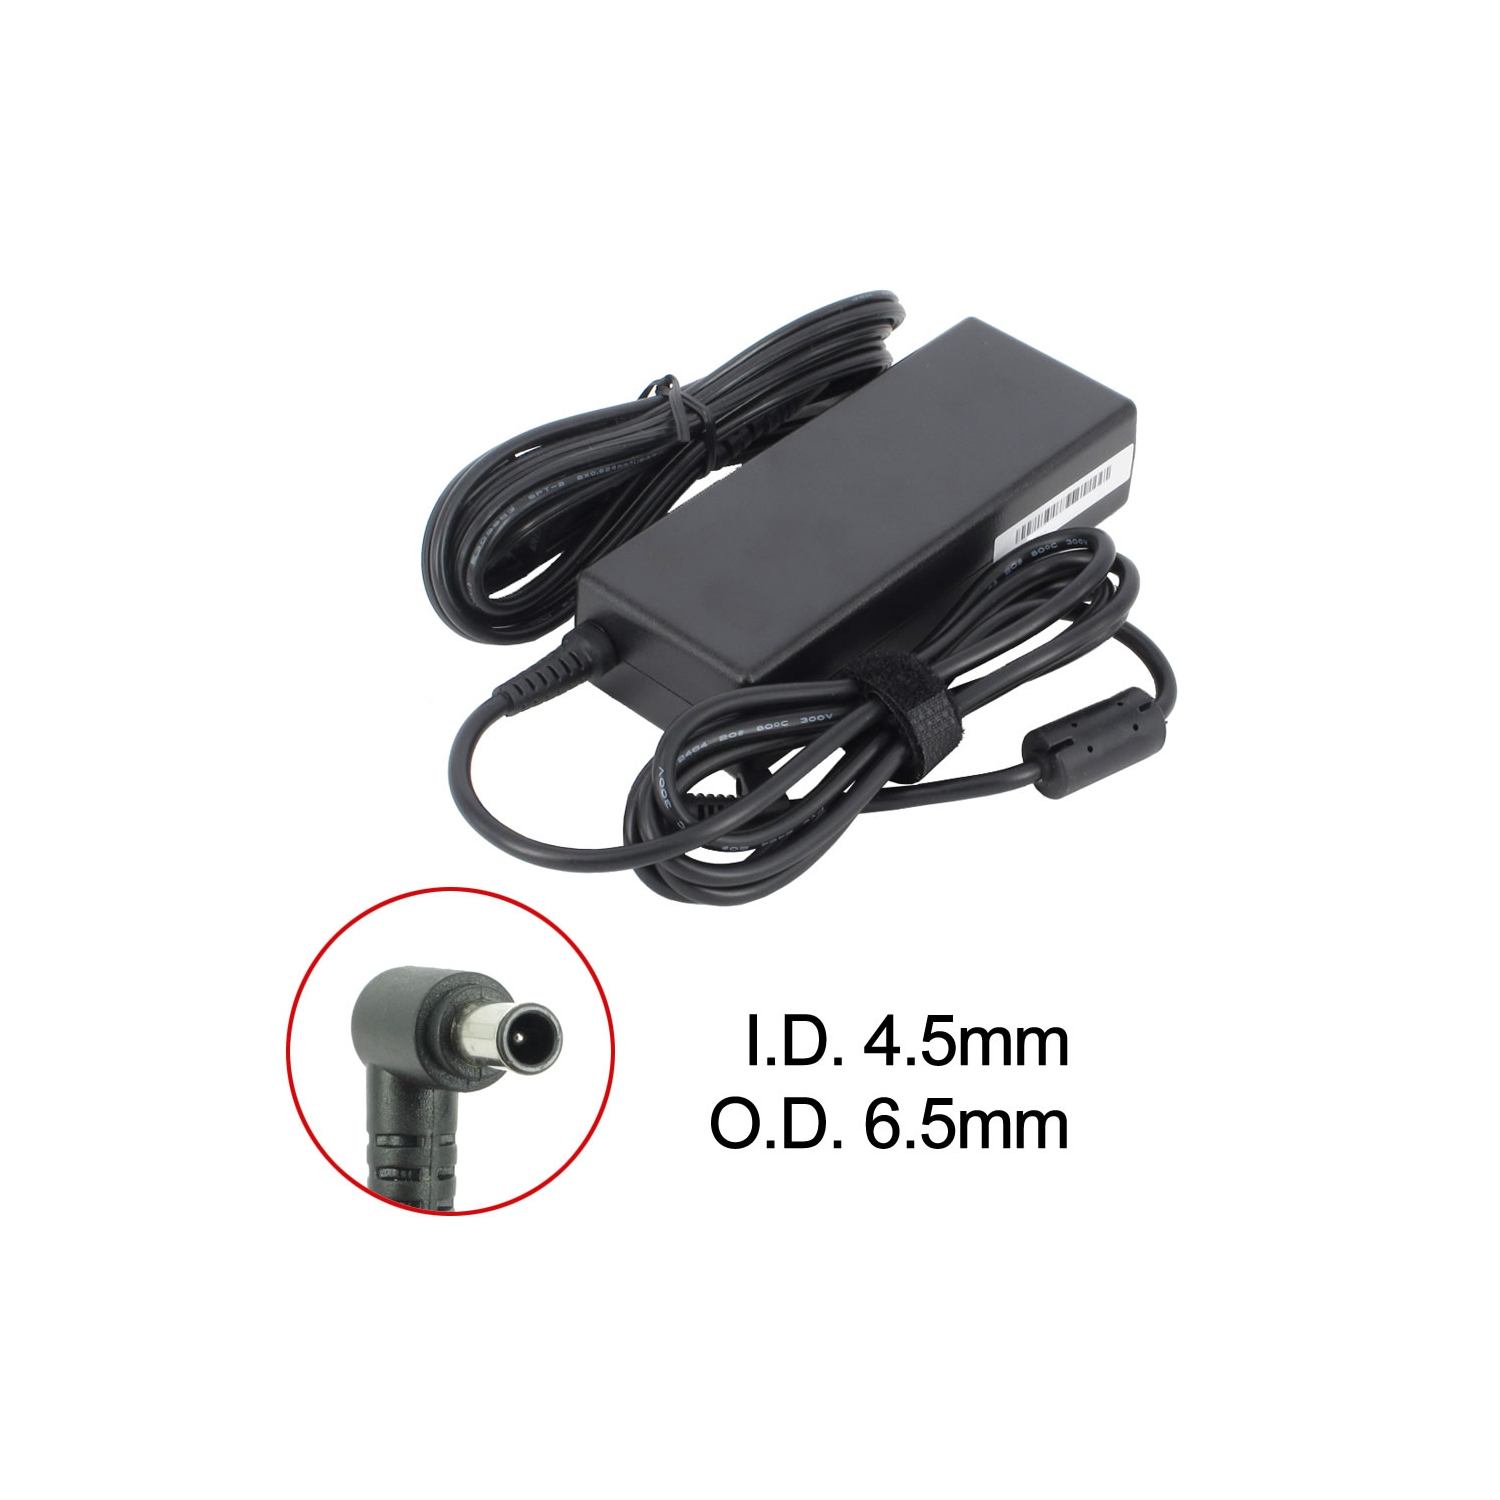 Brand New Laptop AC Adapter for Sony VAIO PCG-FR70 Series, PCGA-AC19V1, PCGA-AC19V23, VGP-AC19V19, VGP-AC19V27, VGP-AC19V48